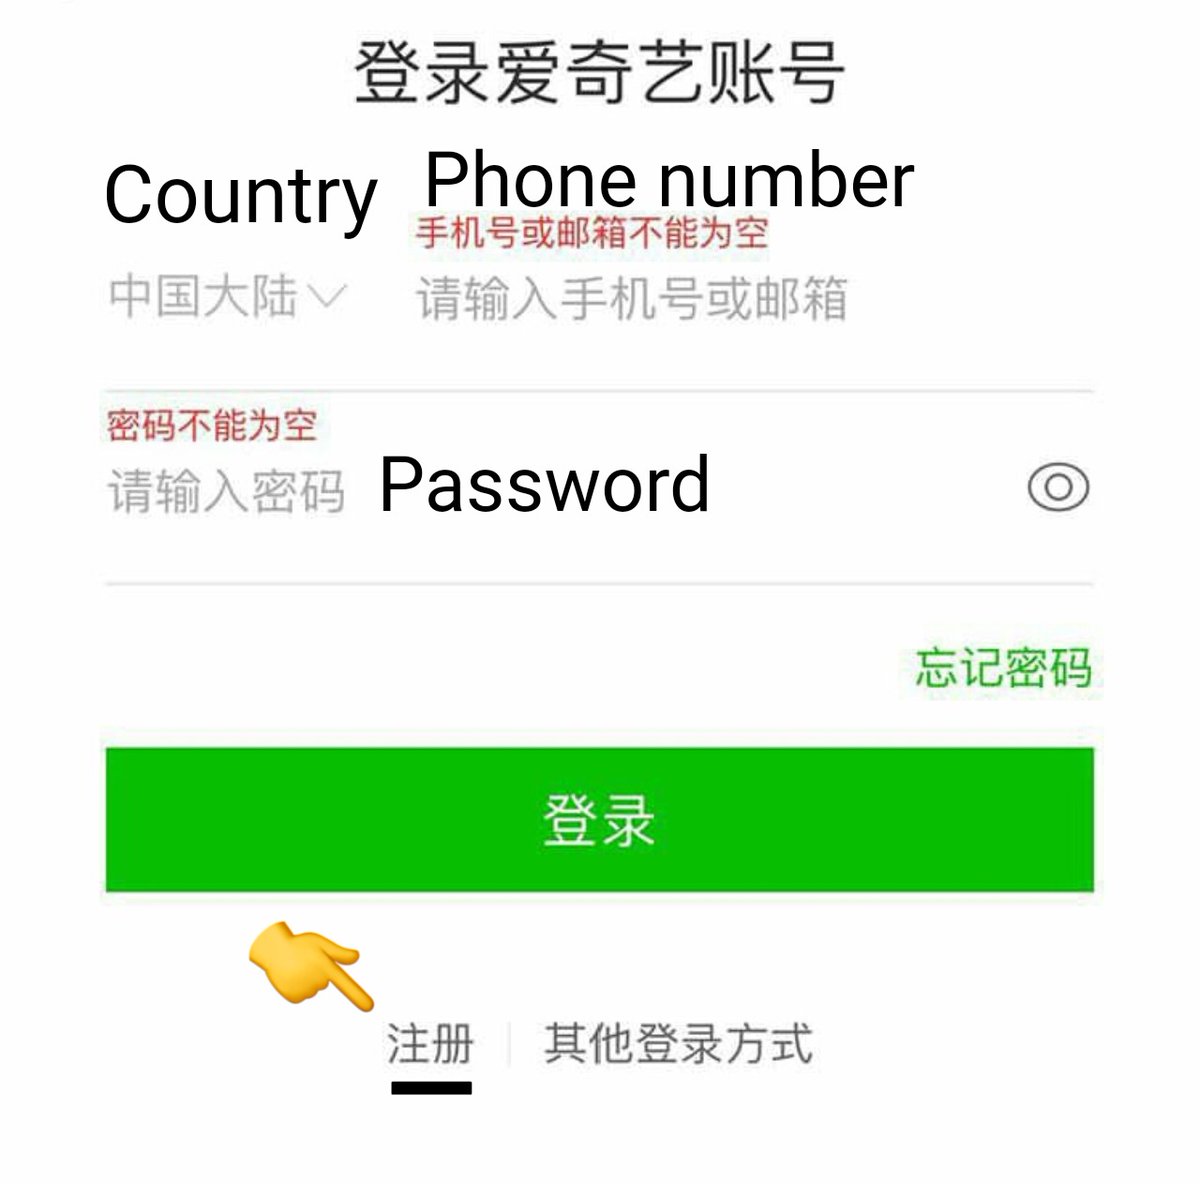 3. Press on 注册 at the bottomNote:If it only shows 4 options when you press on country reload the page a couple of times then it will show the full list of countries